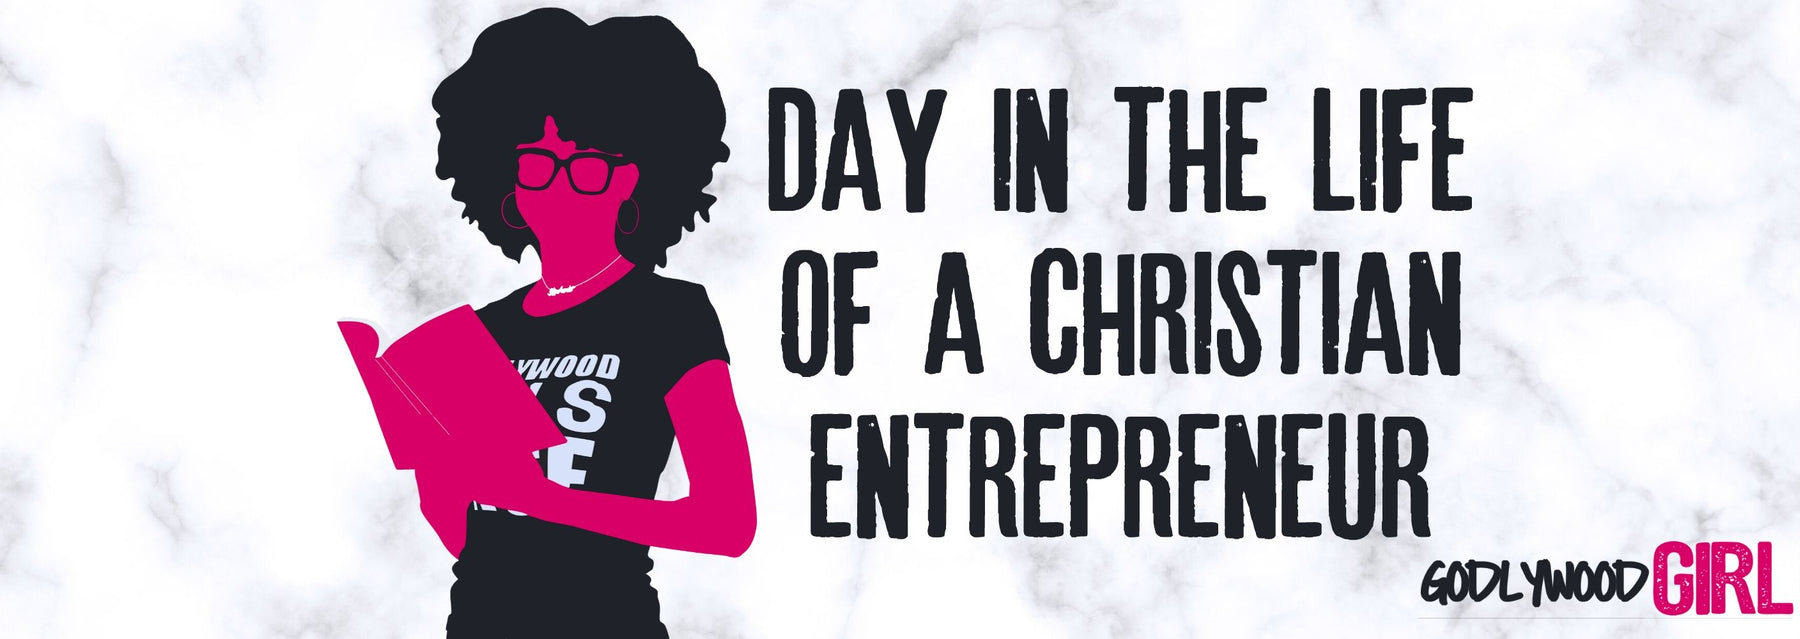 Day In The Life Of A Christian Entrepreneur Ep.39 | Webinar, Movies And Panic Attacks